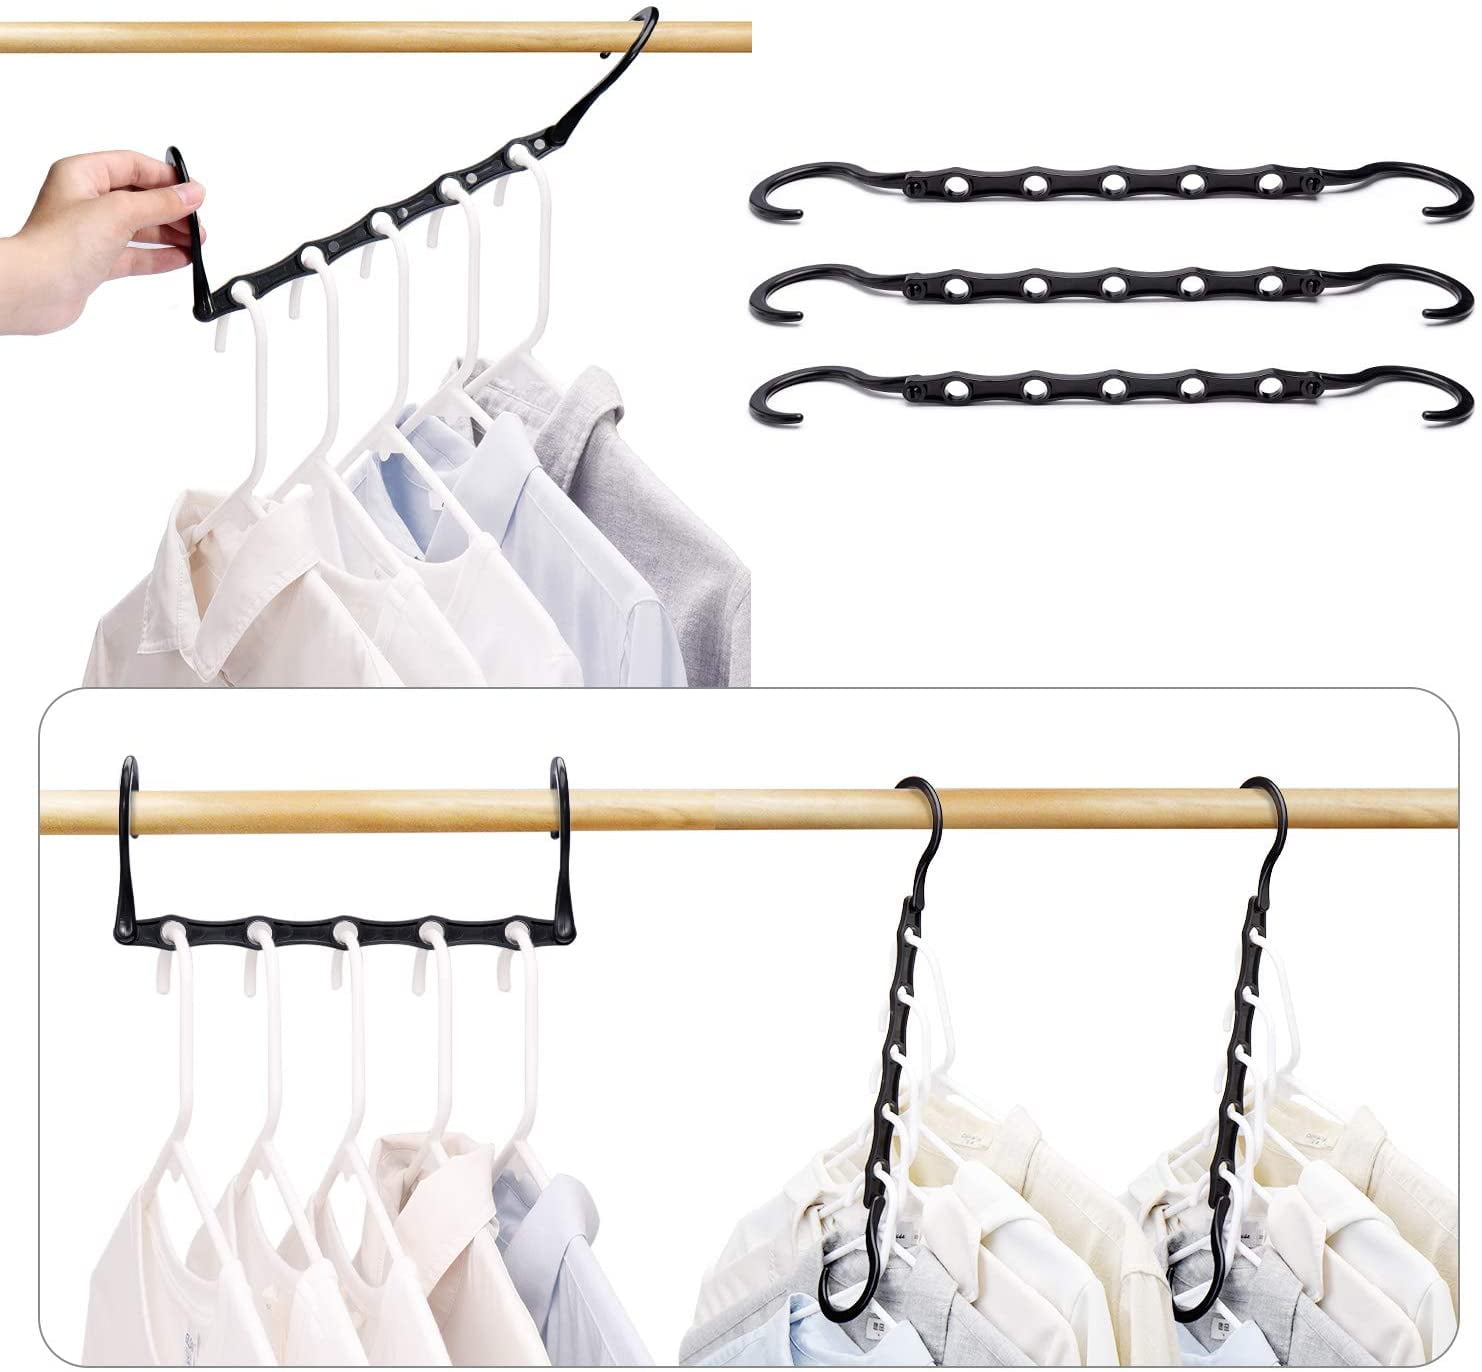 HOUSE DAY Black Magic Hangers 10pcs Space Saving Clothes Hangers Organizer Smart Closet Space Saver with Sturdy Plastic for Heavy Clothes 